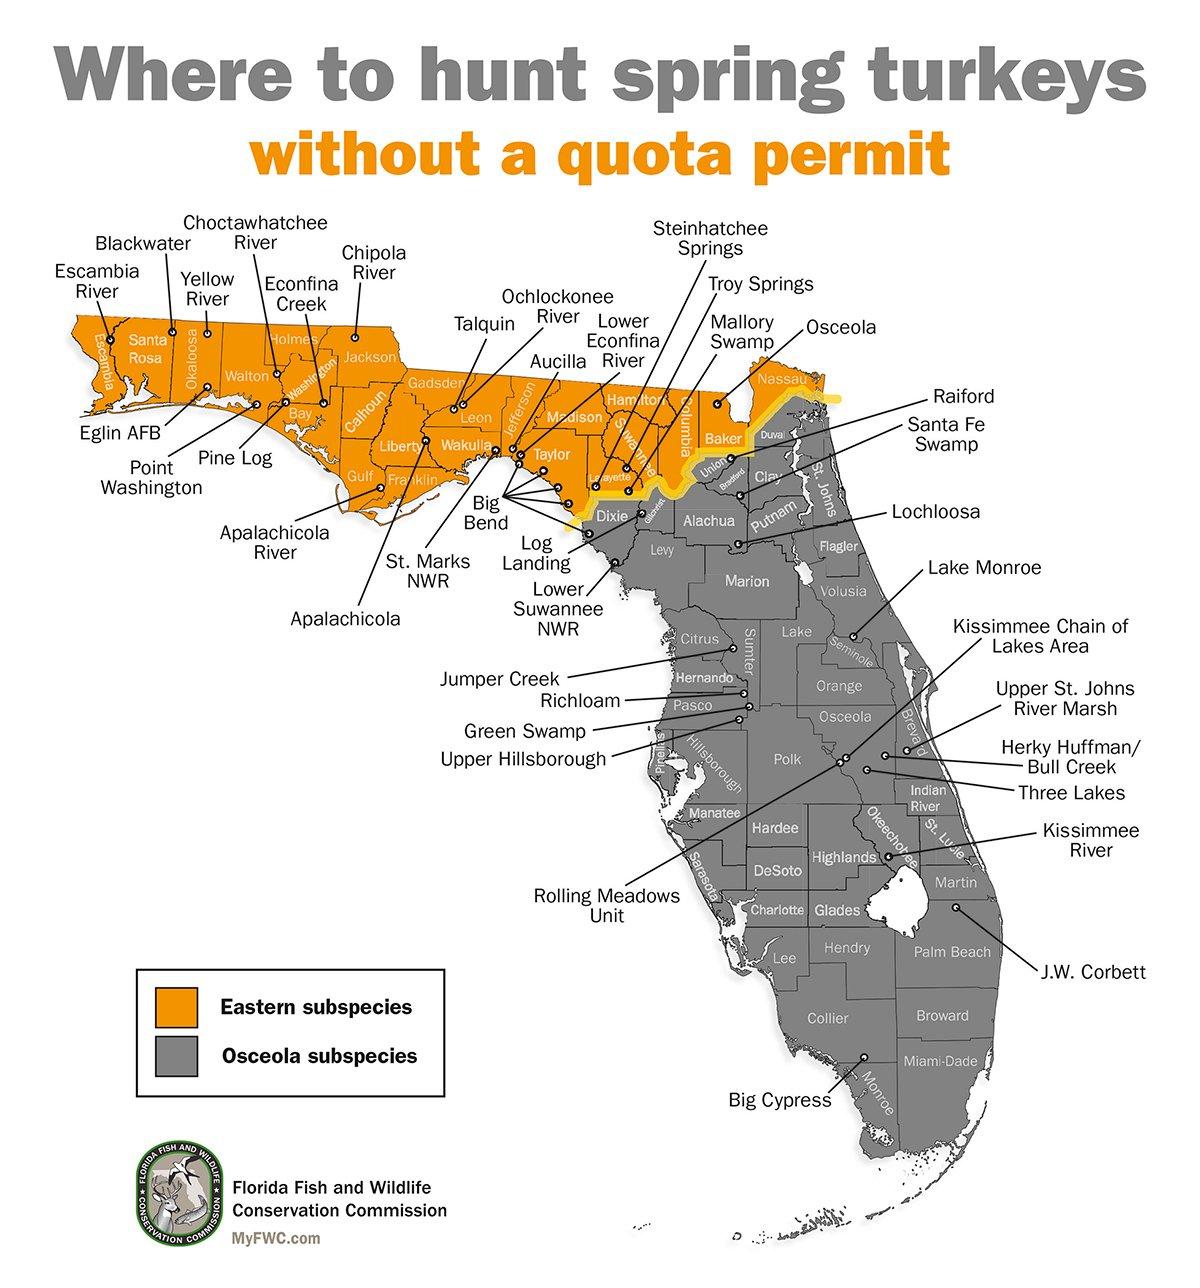  Some public lands allow spring turkey hunts with a quota permit; some without it. Image by Florida Fish and Wildlife Conservation Commission